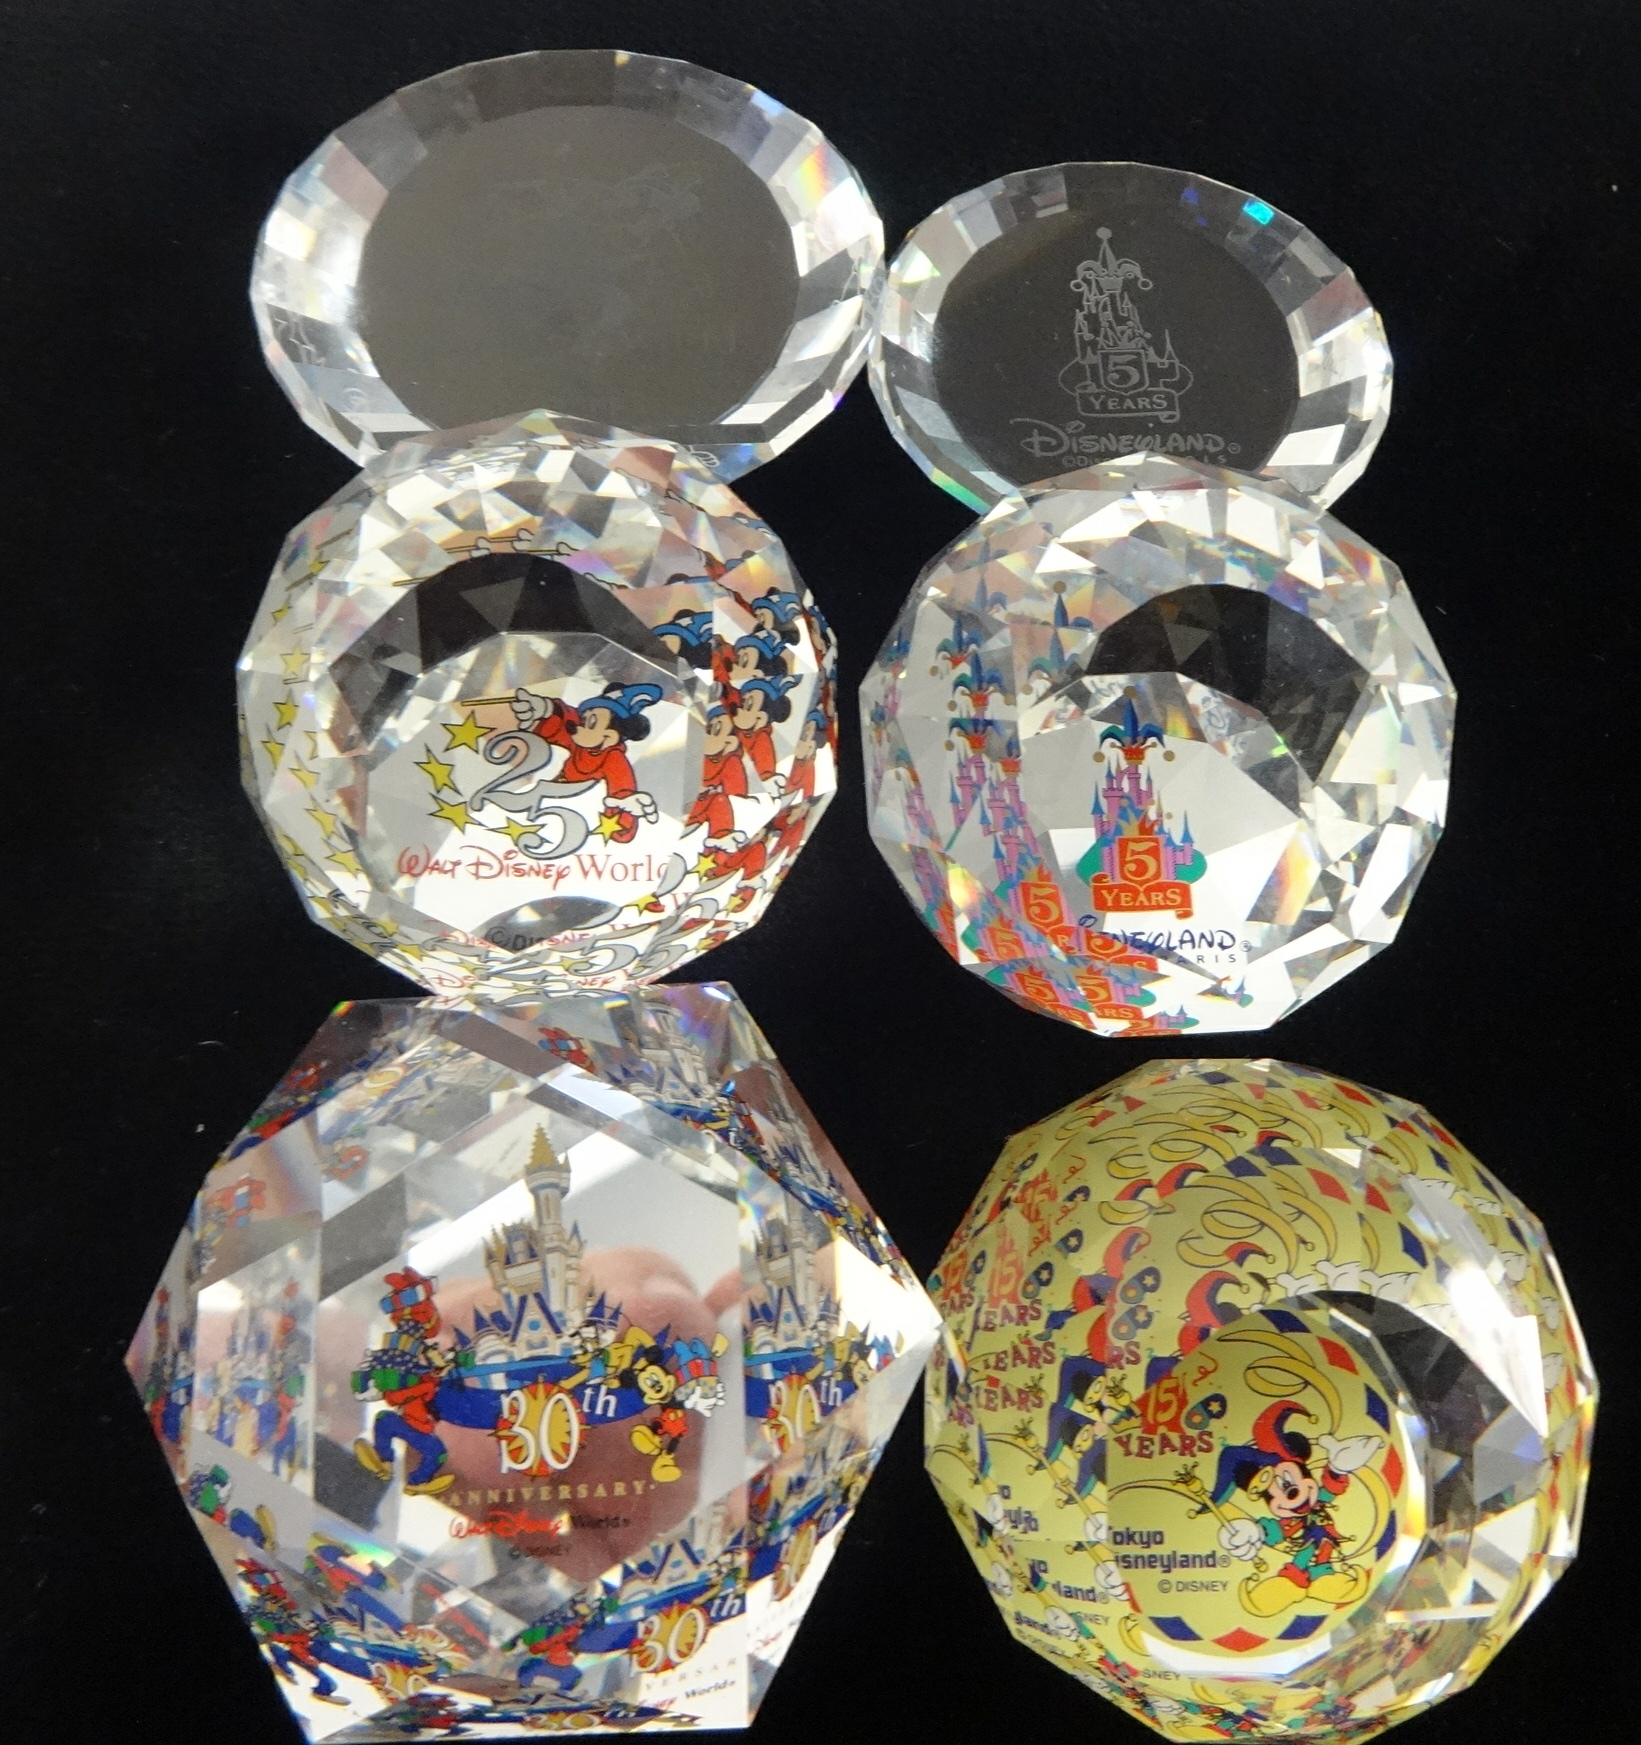 Swarovski Crystal glass Collection of paperweights. 4 Disney anniversary paperweights and 2